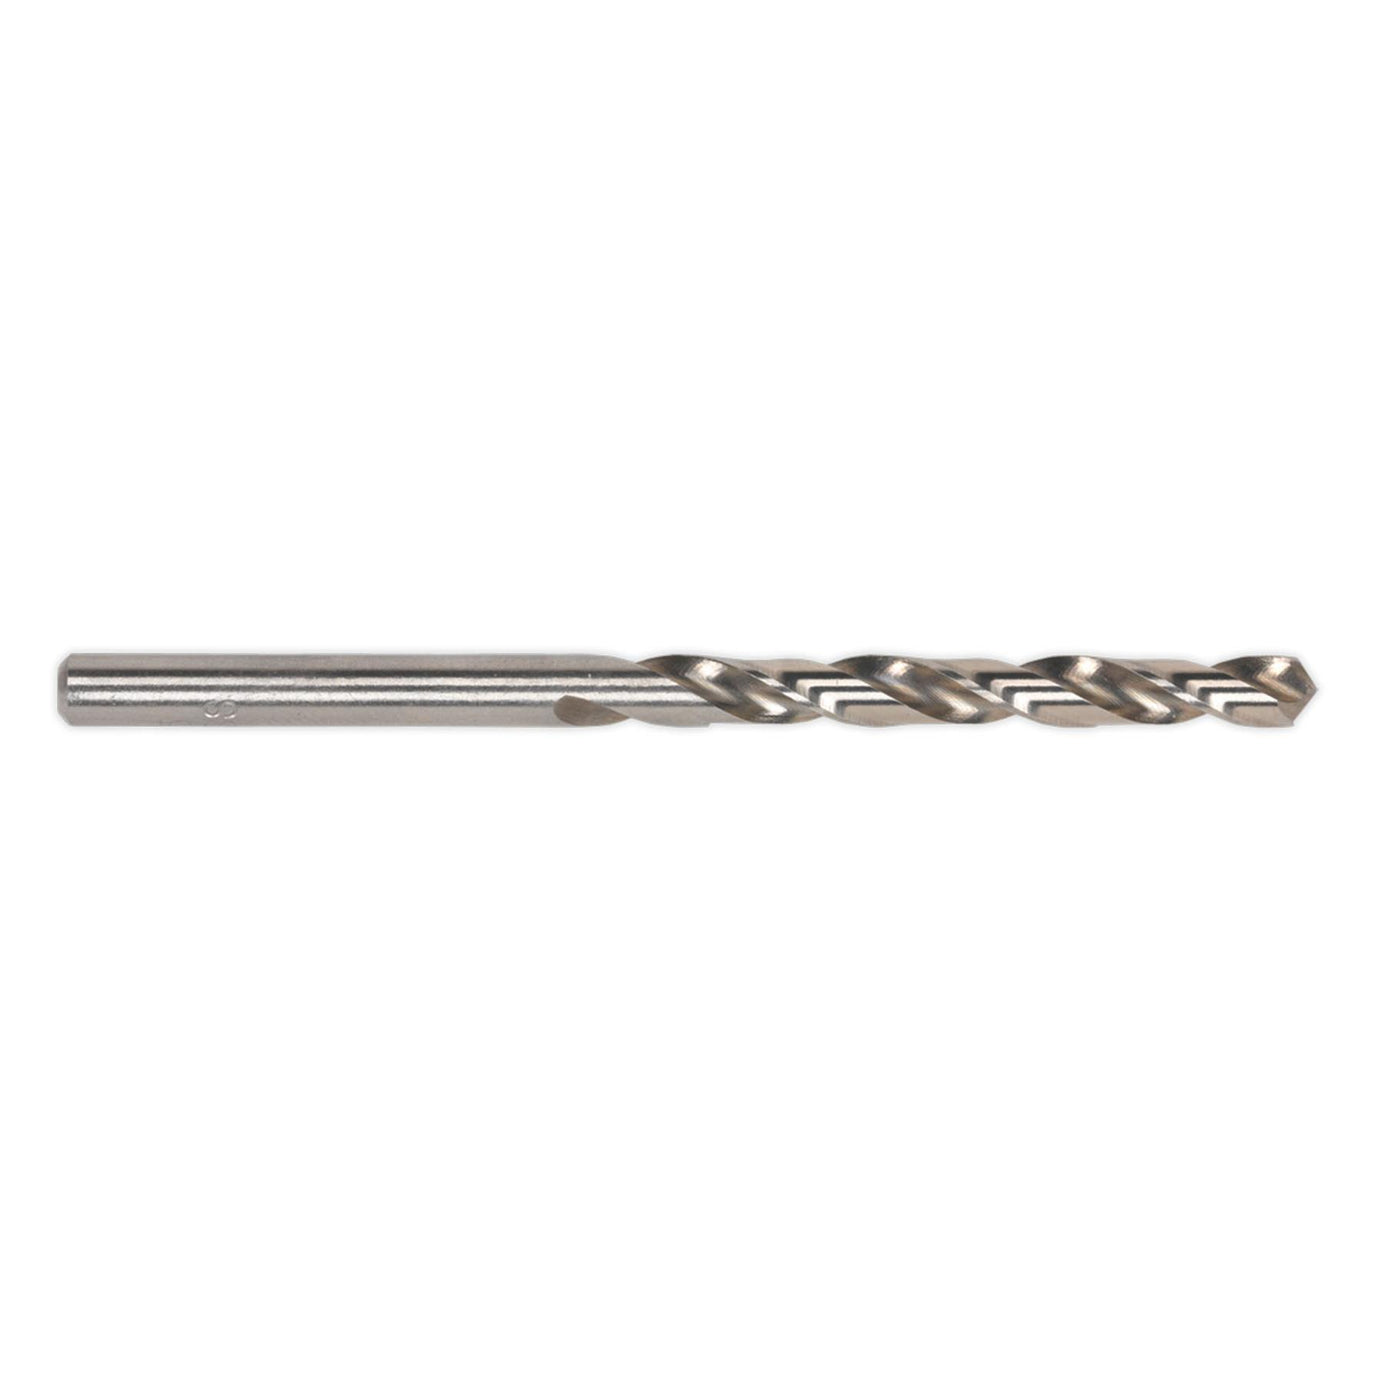 Sealey HSS Fully Ground Drill Bit �9.5mm Pack of 10